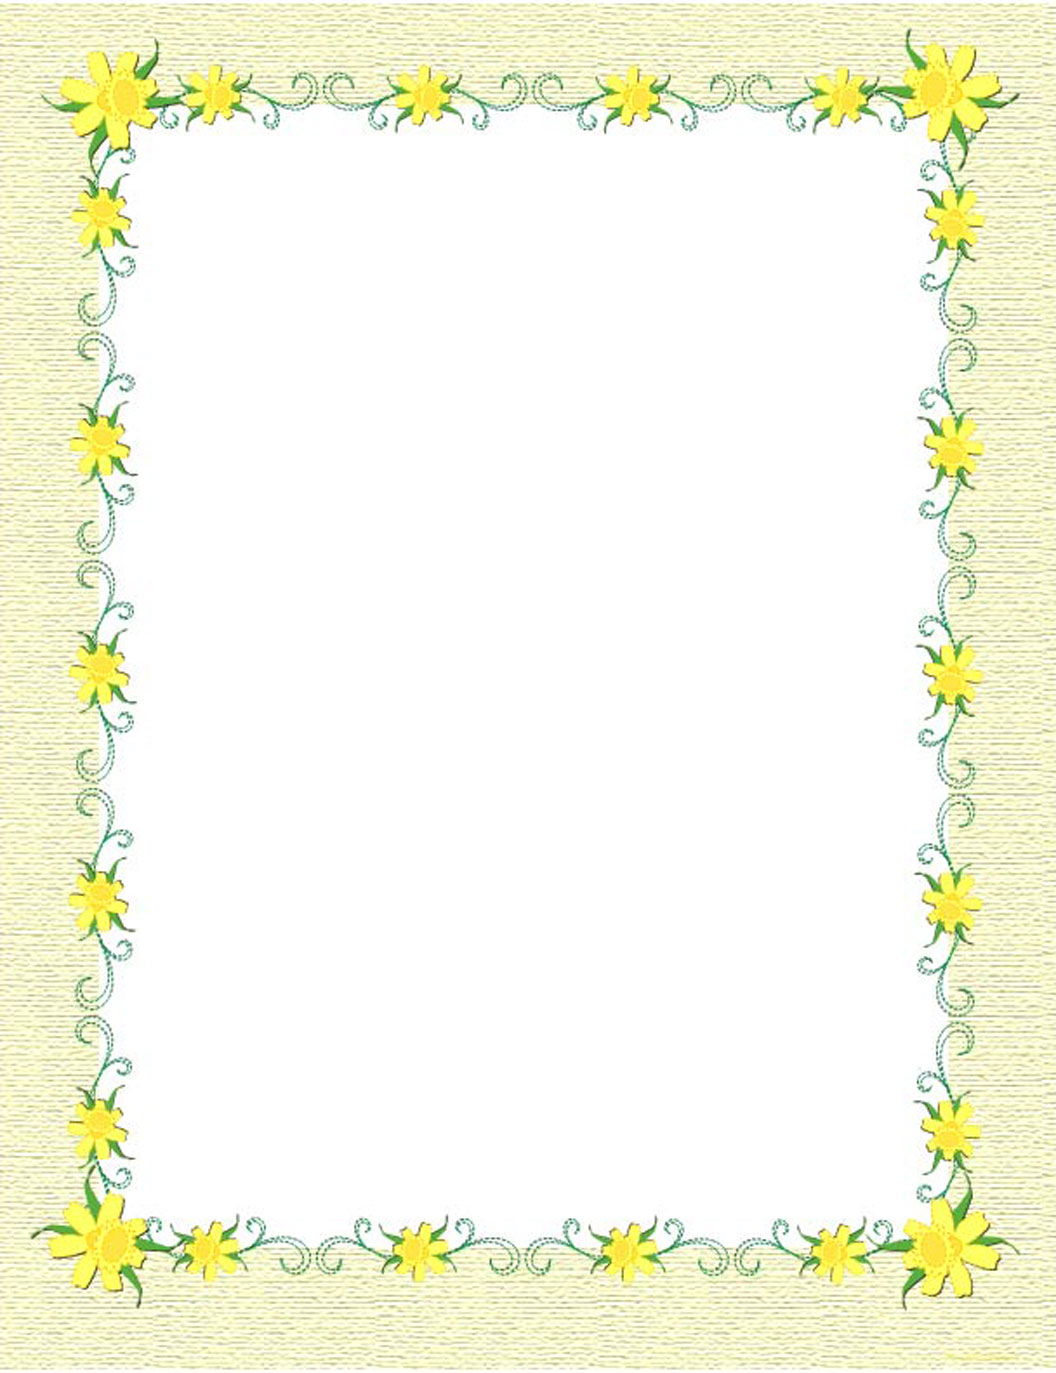 clipart spring flowers border - photo #14